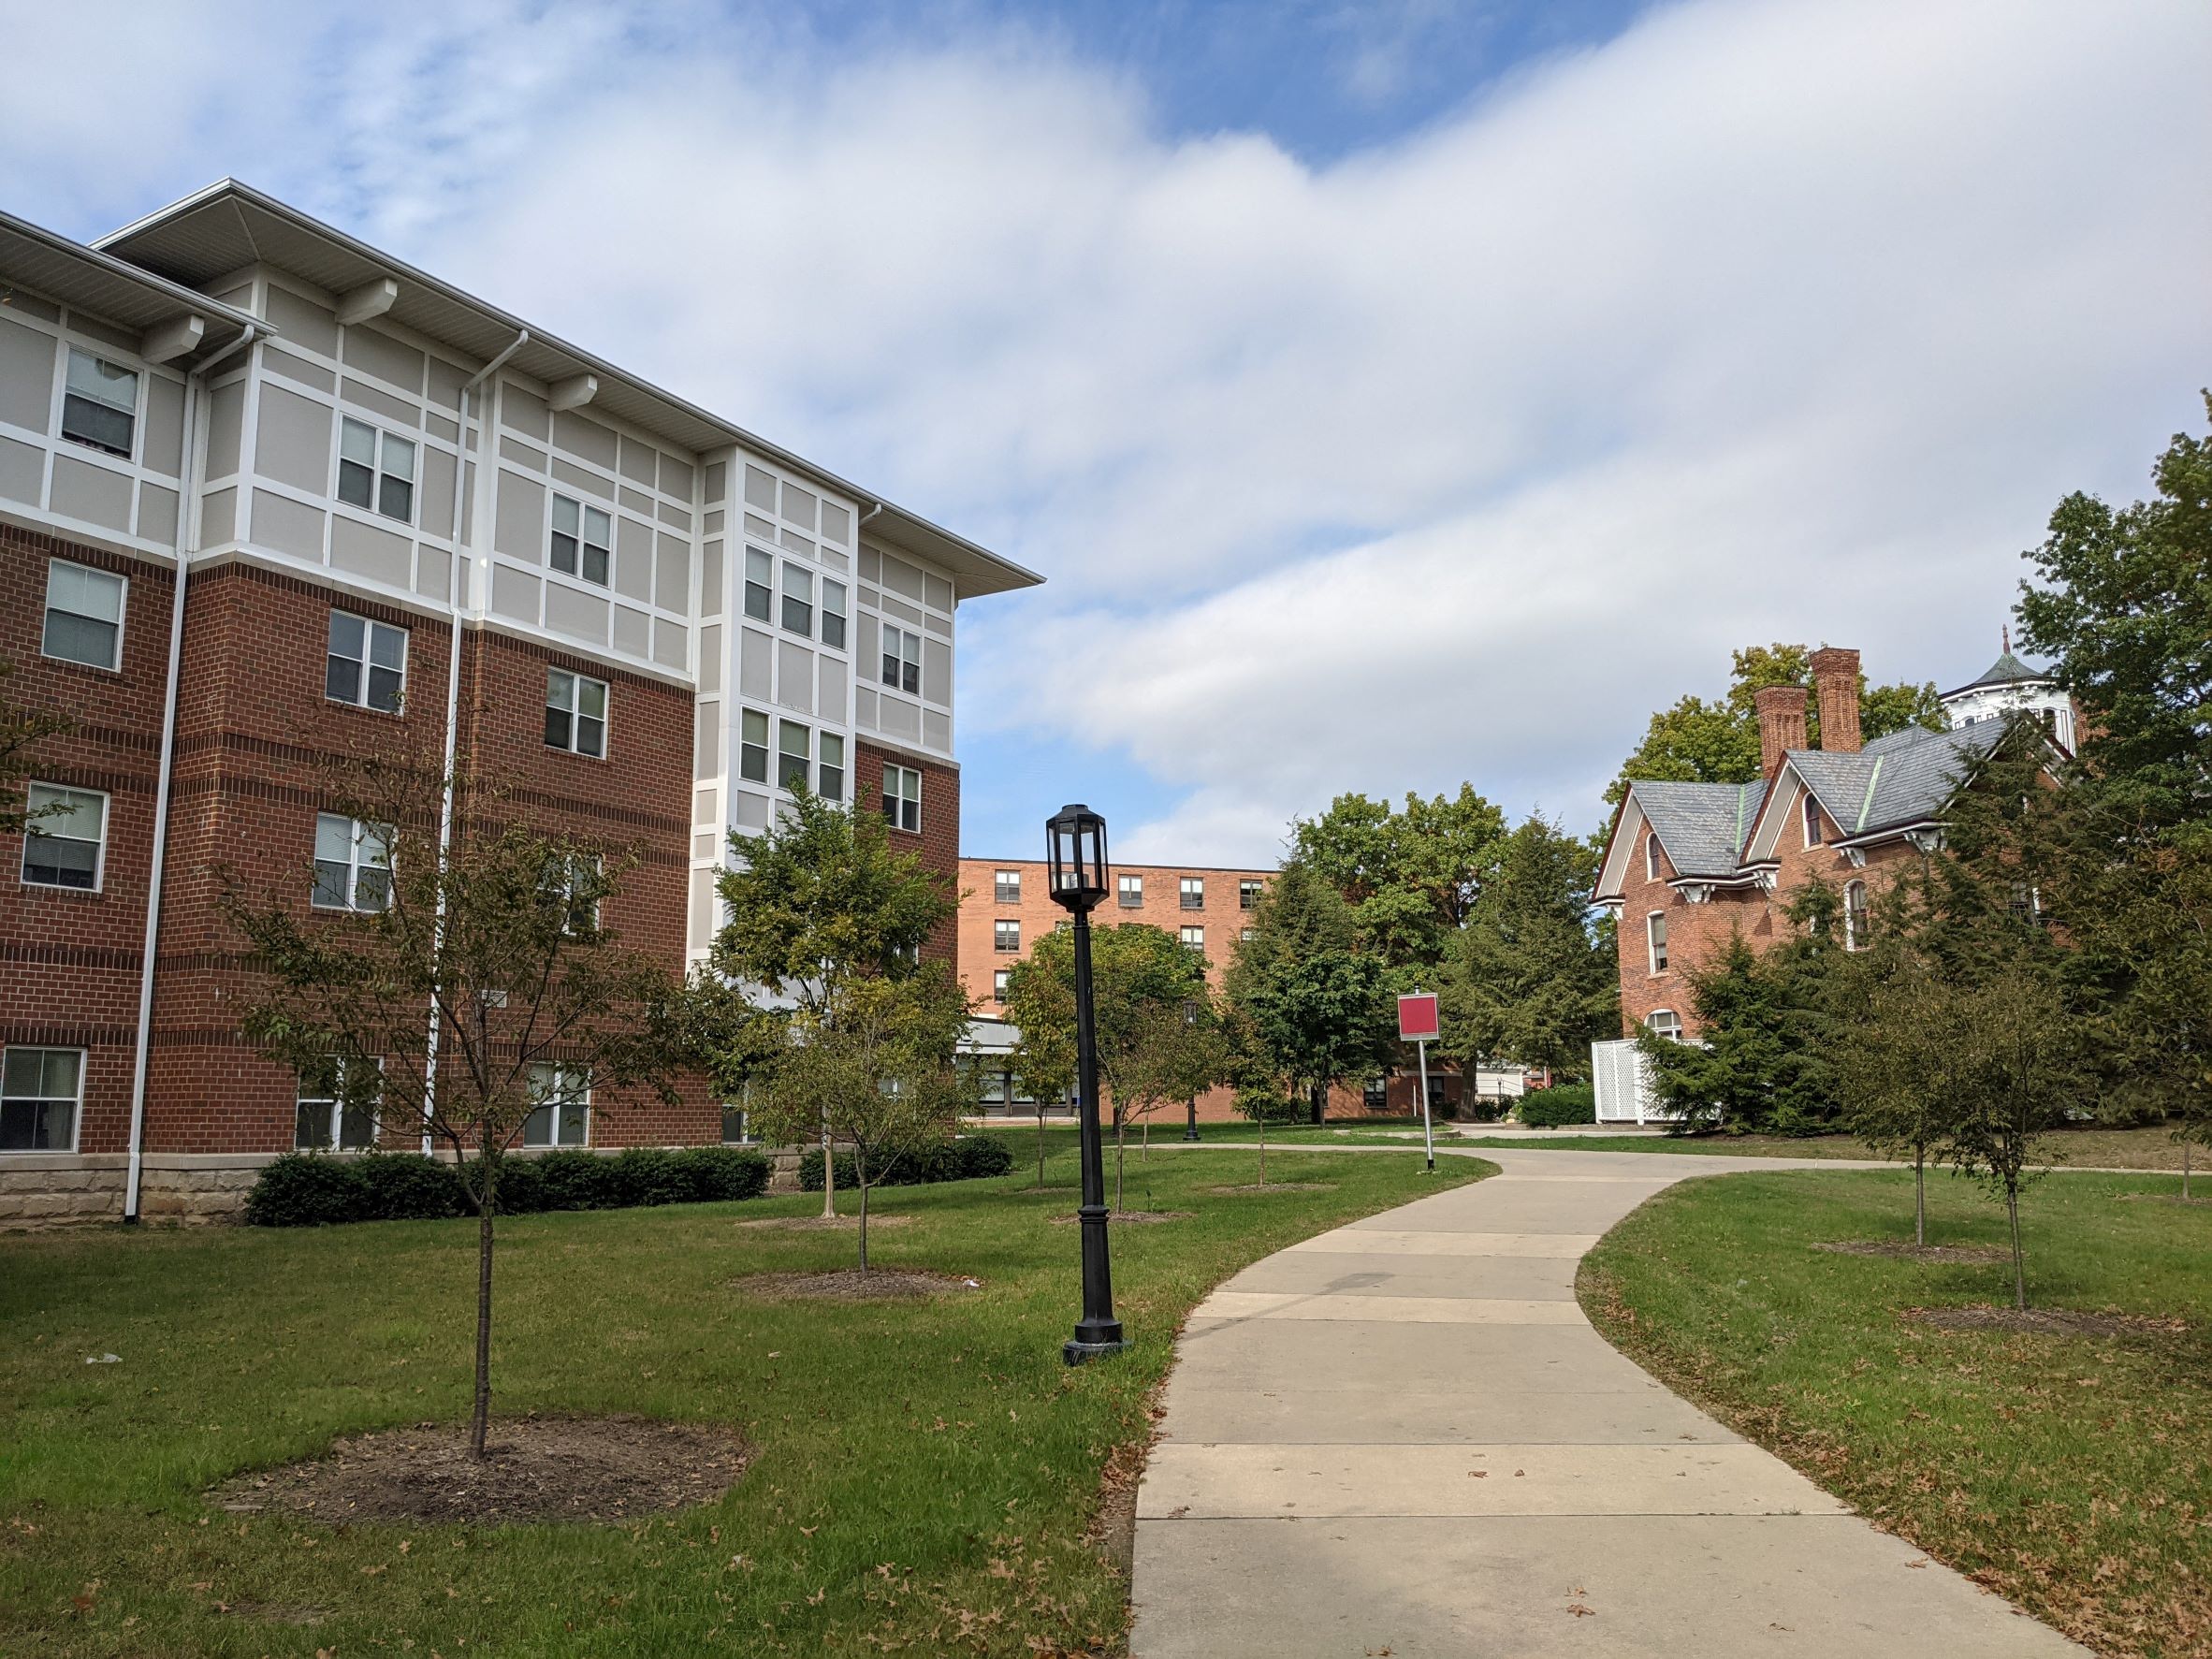 Arts & Crafts style living learning student housing community dormitory building with pink brick and white Tudor style board and batten clerestory and bay window, with large overhangs, sidewalk in foreground with campus alumni house of similar architectural style in background